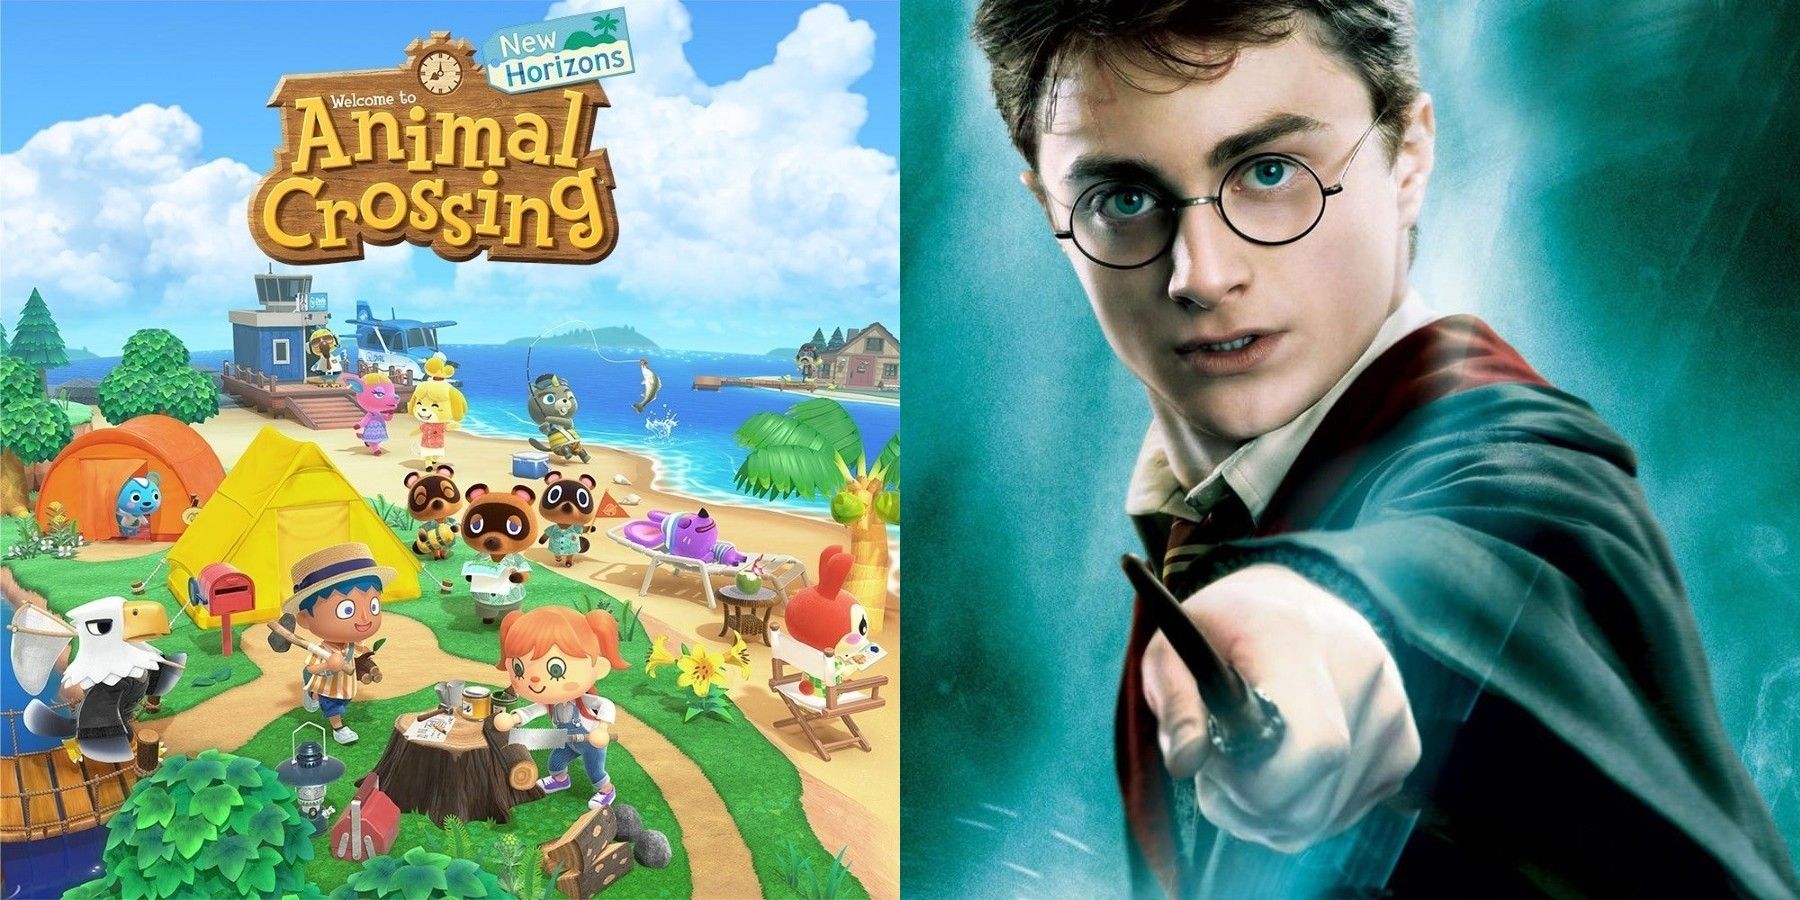 Animal Crossing New Horizons Player Makes Harry Potter-Themed House That Looks Like Hogwarts